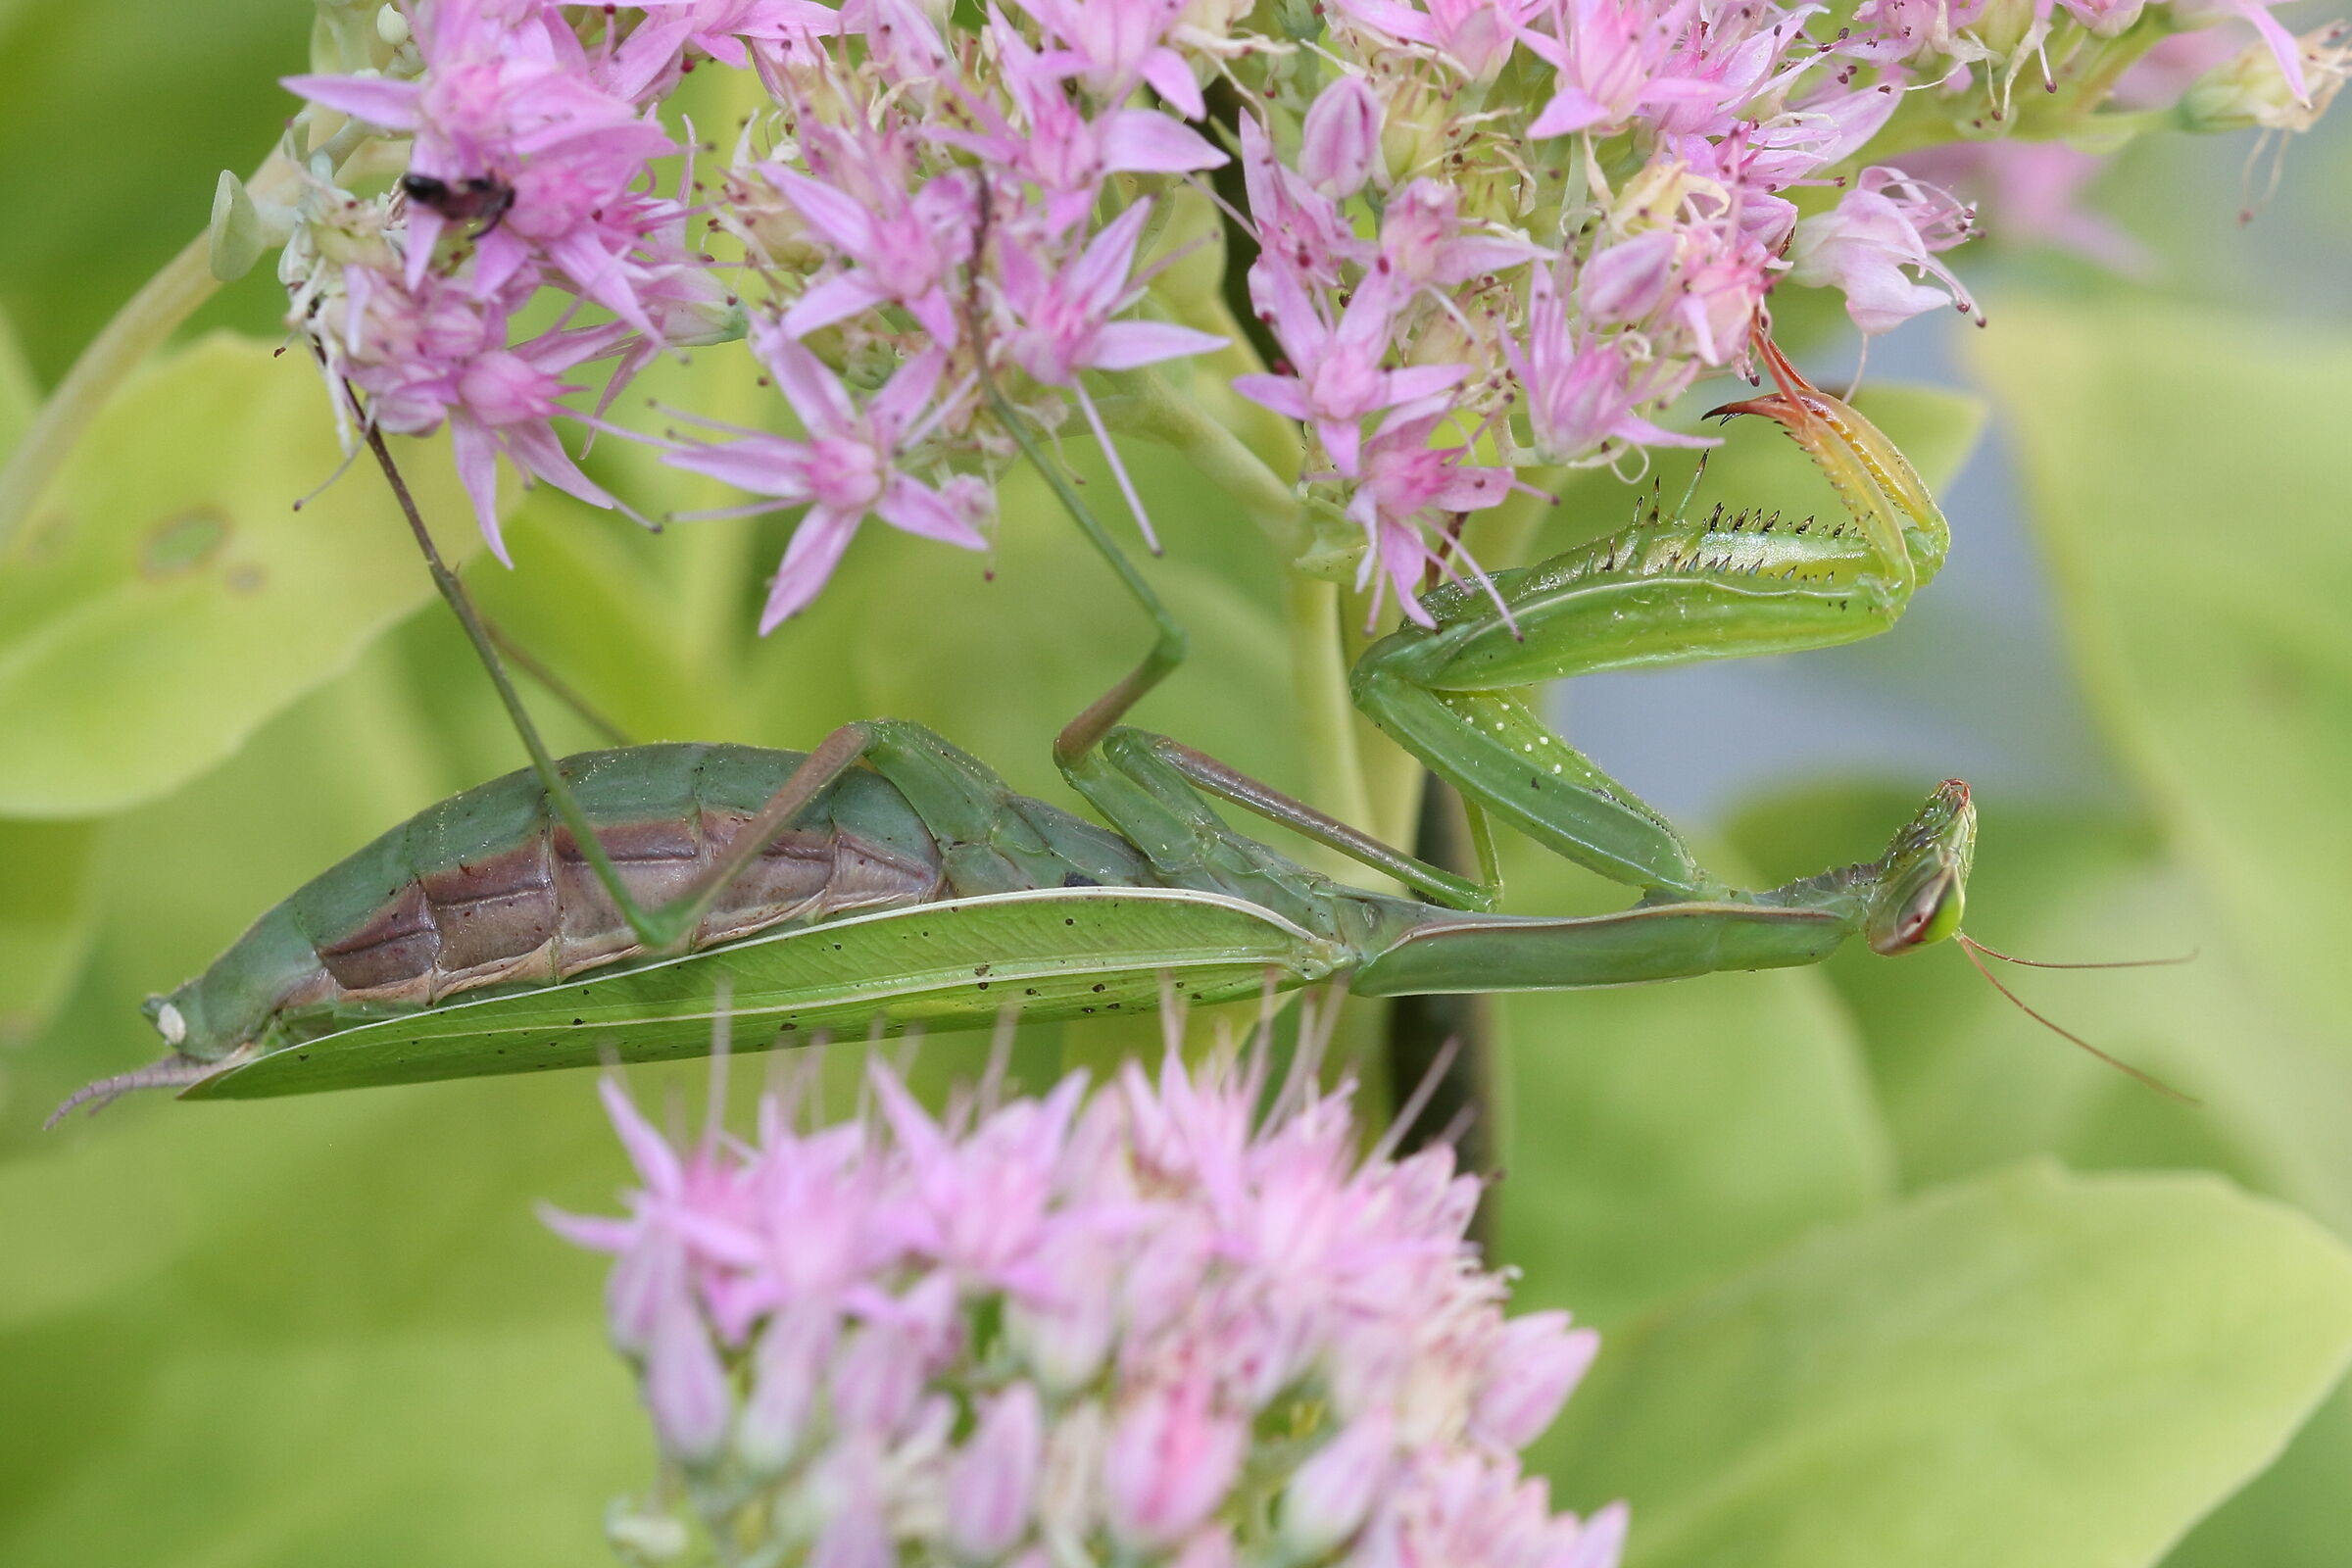 religious mantis among the flowers...